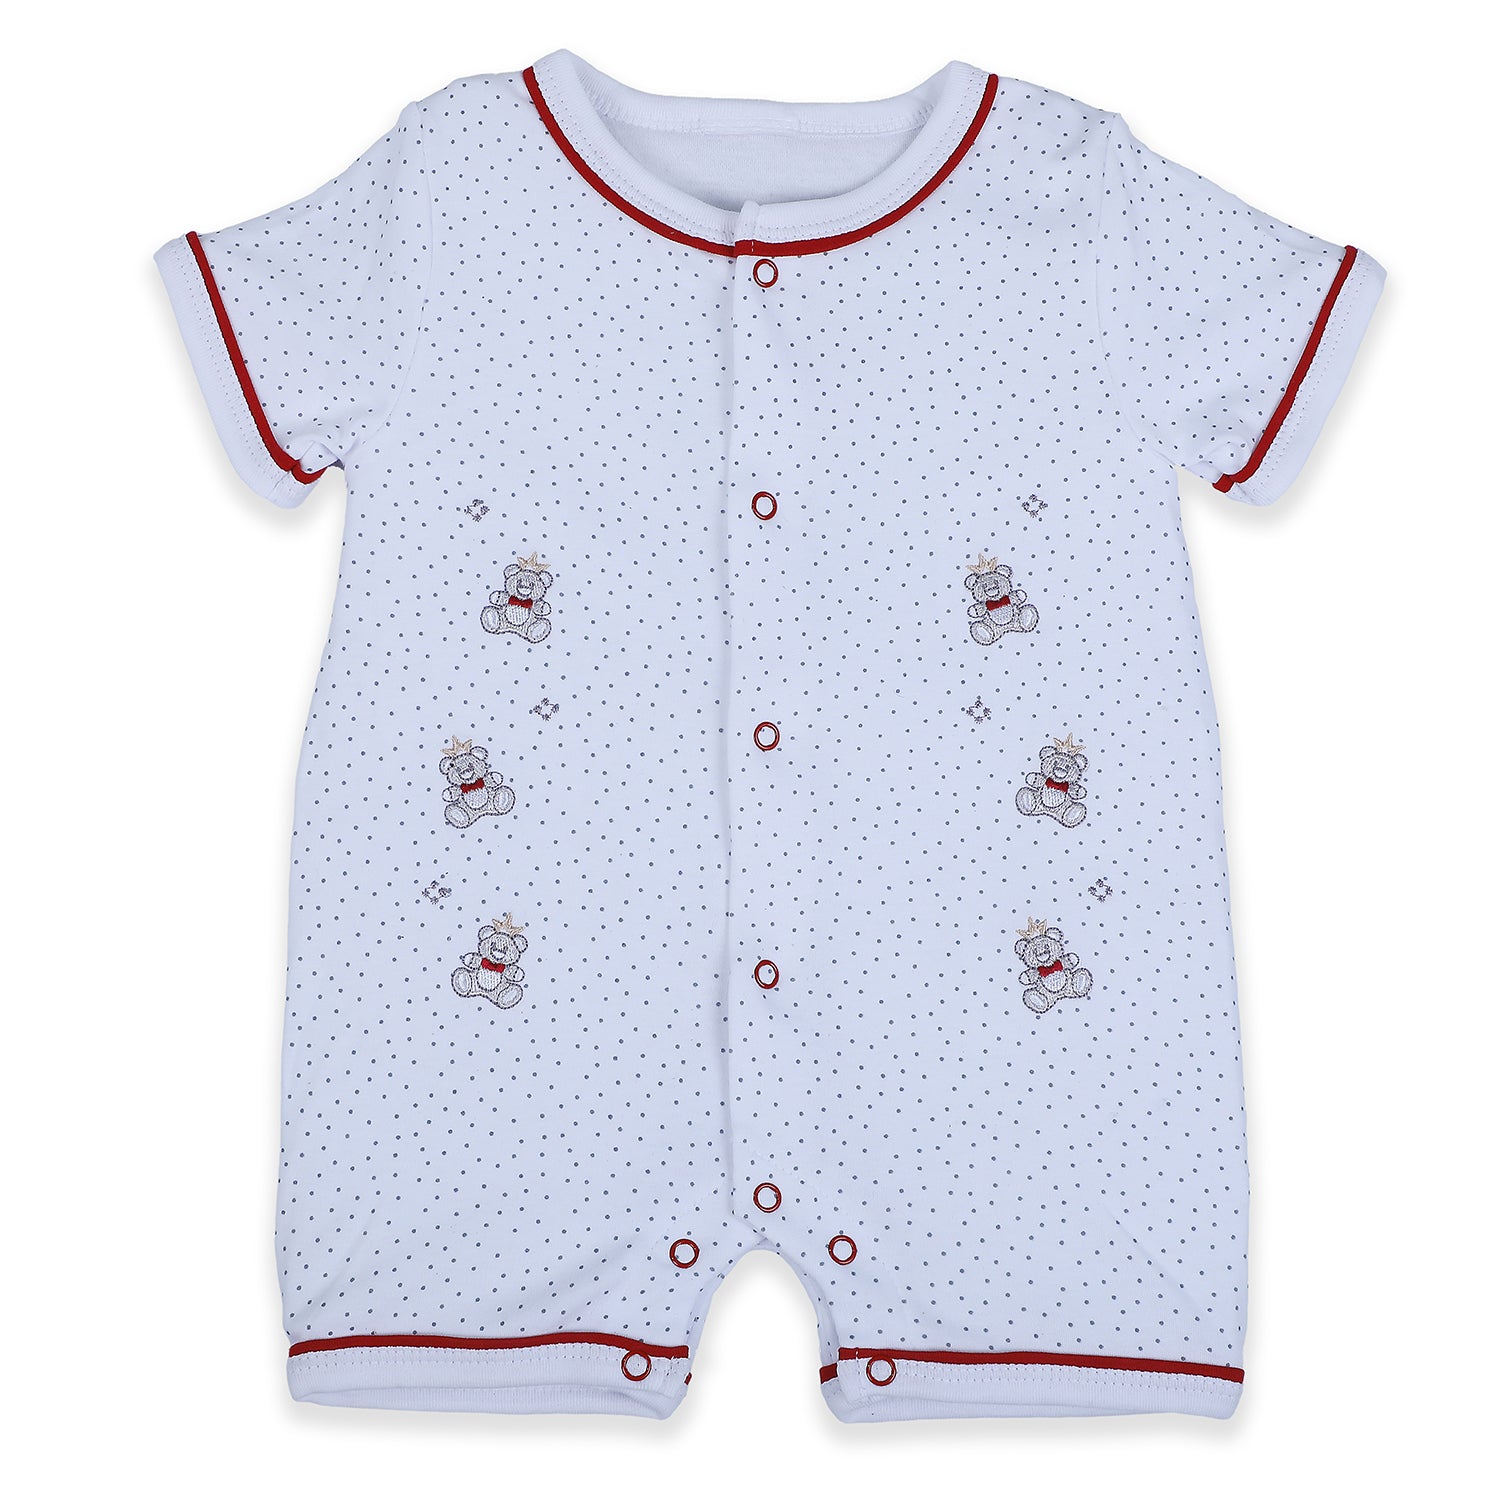 Baby Moo Star Teddy Embroidered Soft Cotton Short Romper - White - Baby Moo